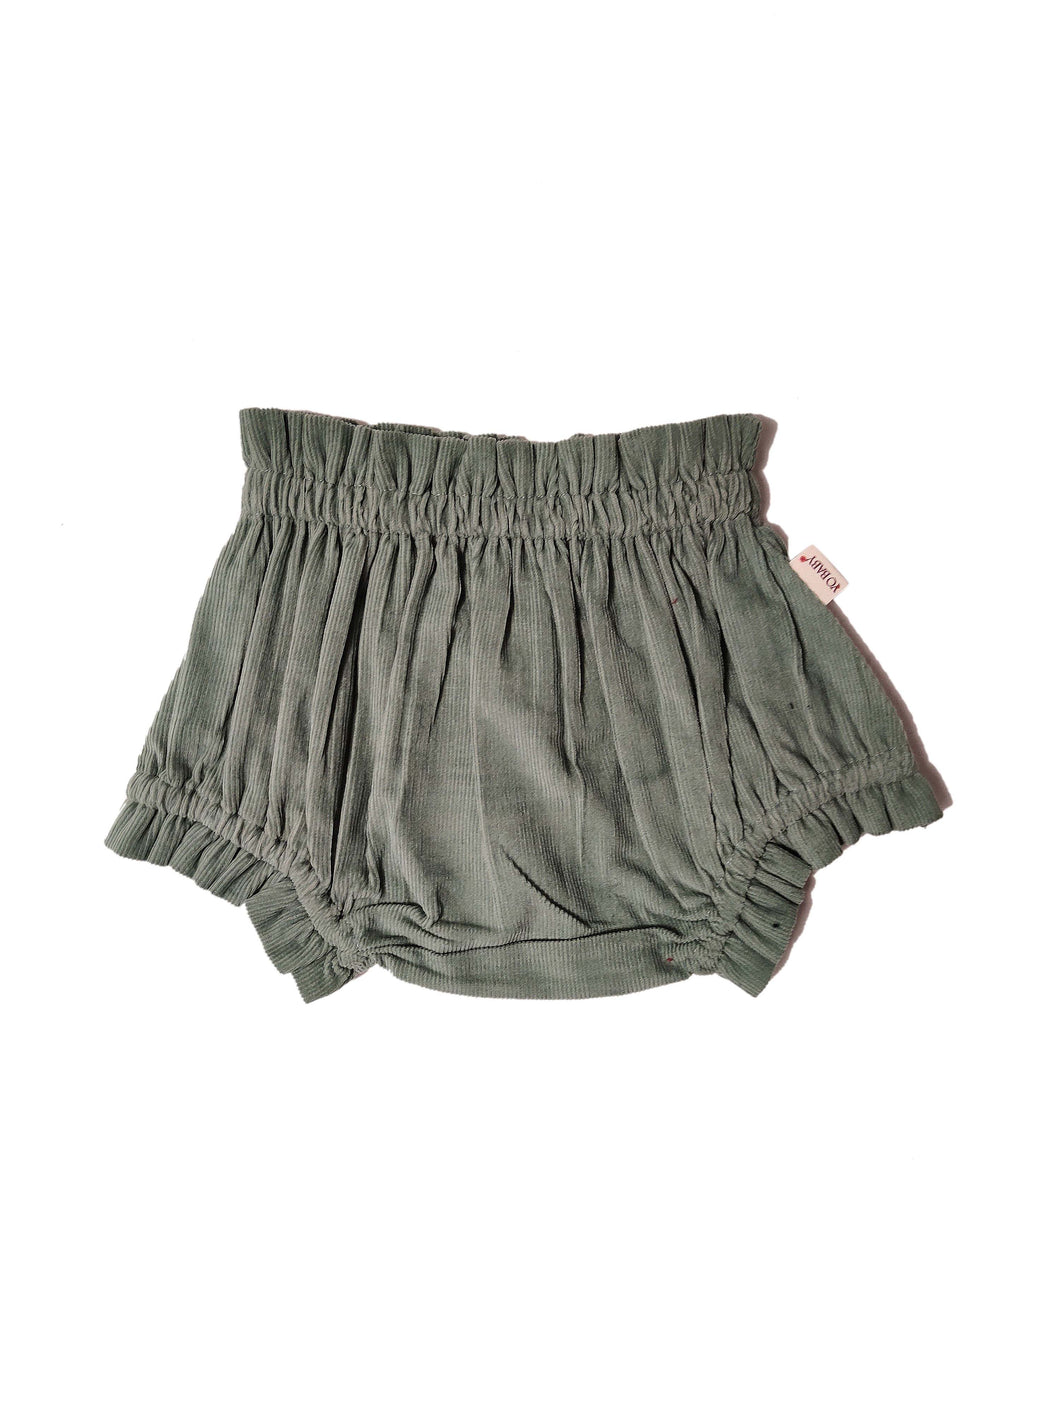 Sage Shorts-Style Corduroy Diaper Cover